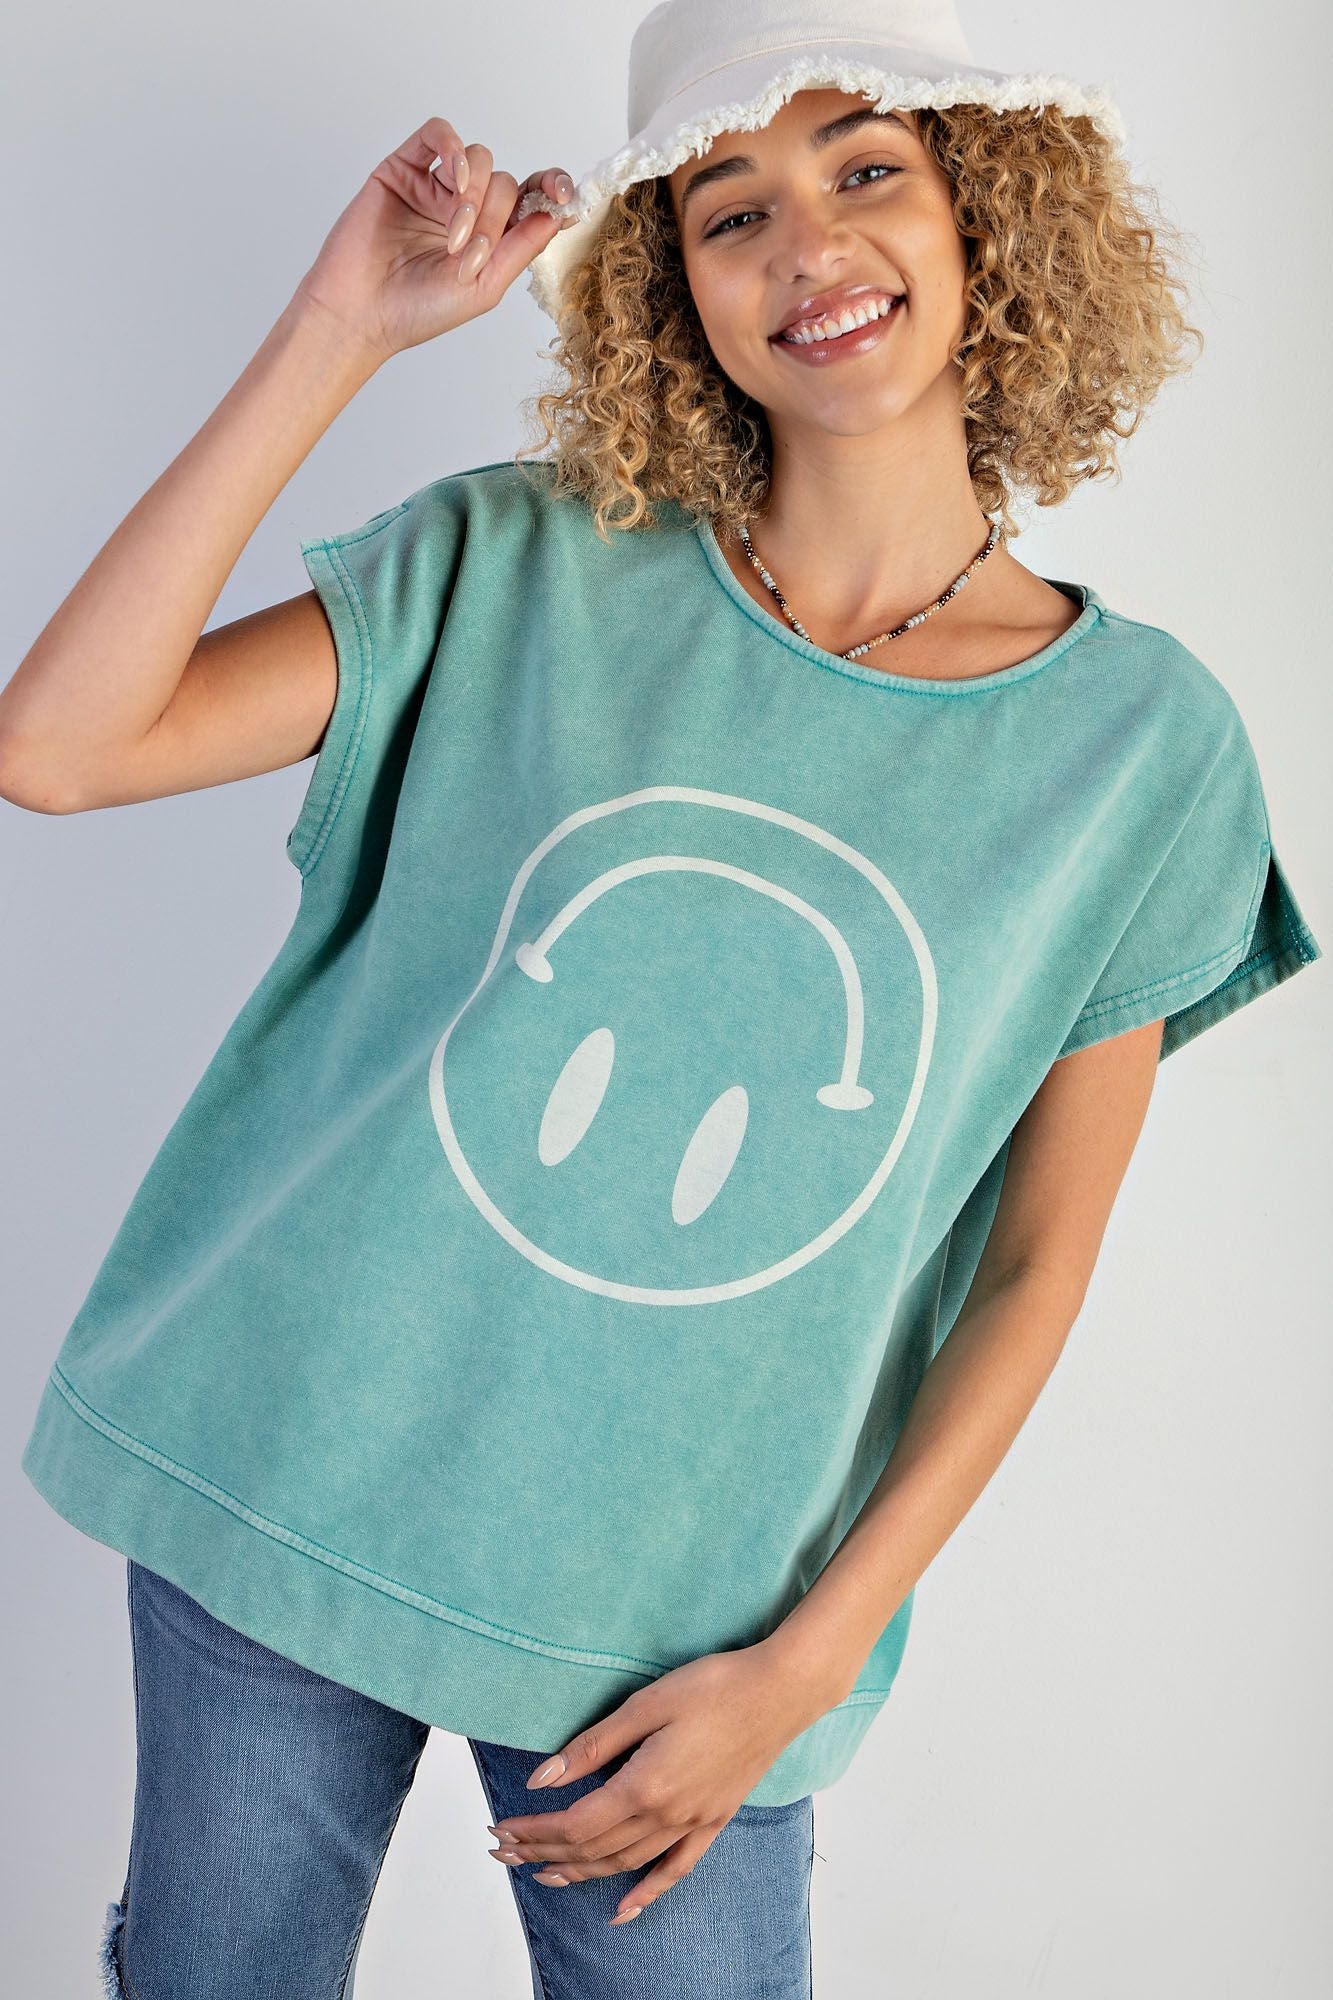 UPSIDE DOWN SMILEY WASHED COTTON JERSEY TOP